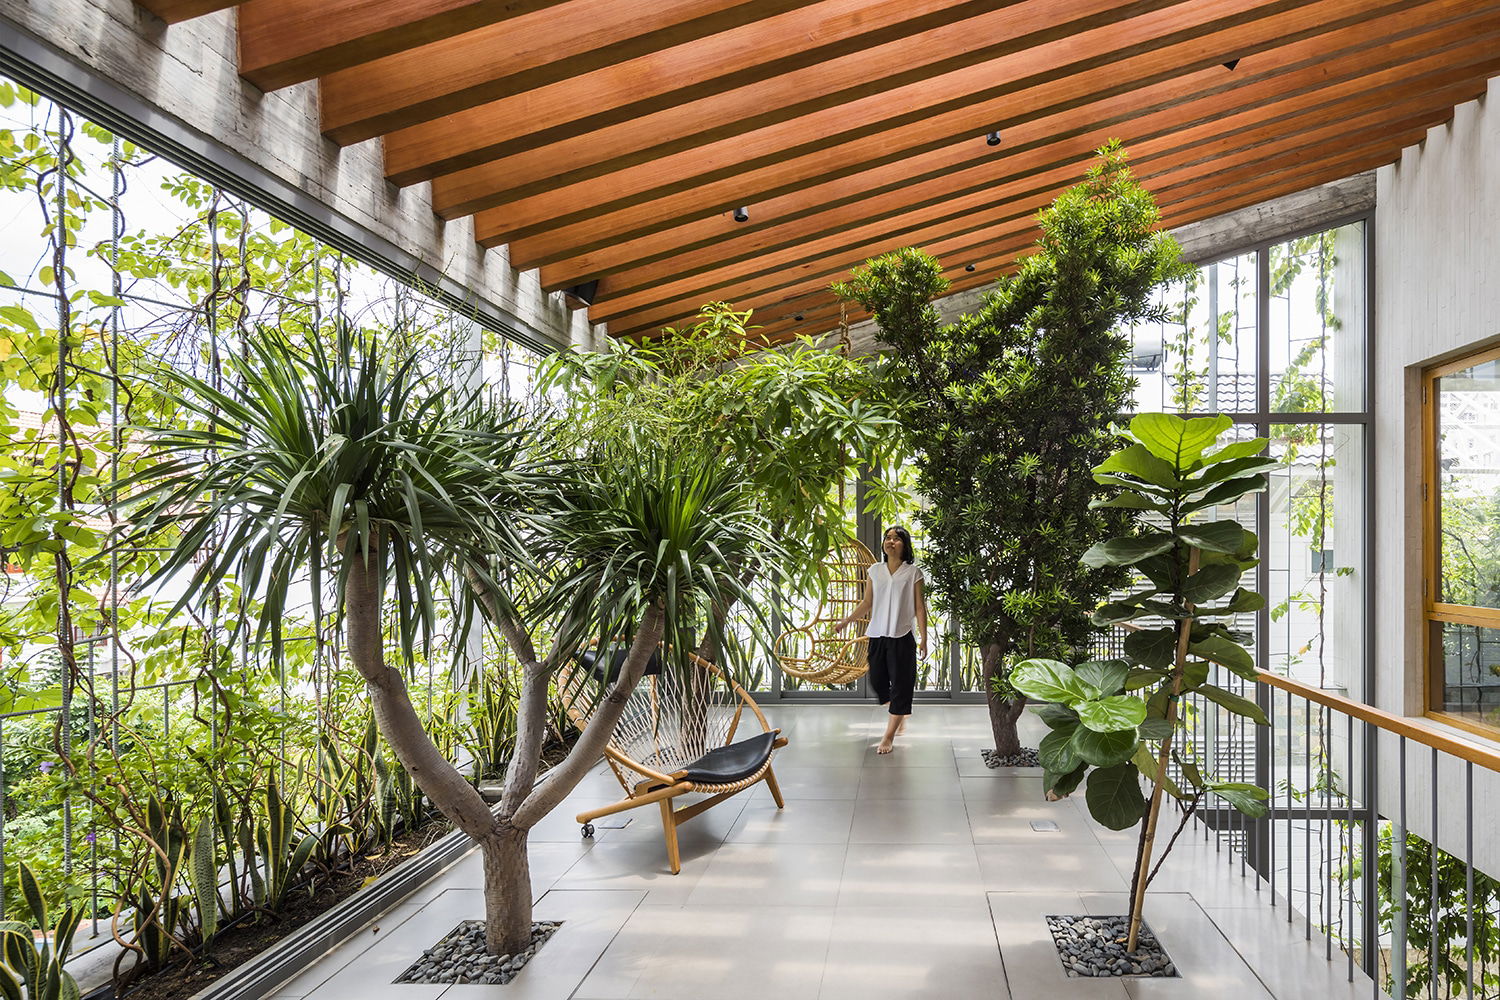 The beauty and benefits of biophilic design for commercial spaces